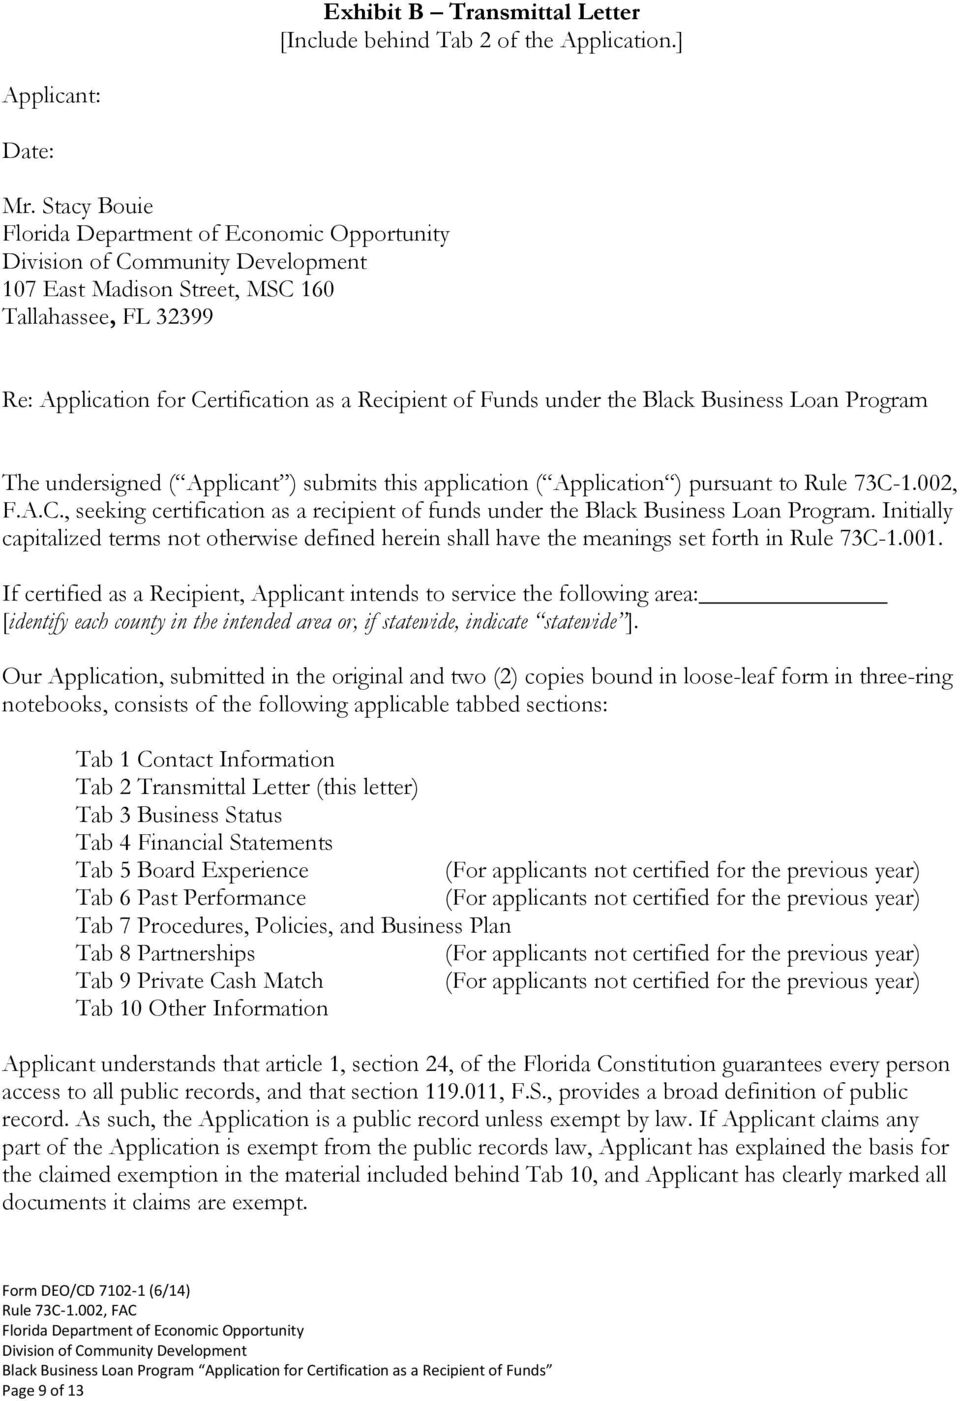 submits this application ( Application ) pursuant to Rule 73C-1.002, F.A.C., seeking certification as a recipient of funds under the Black Business Loan Program.